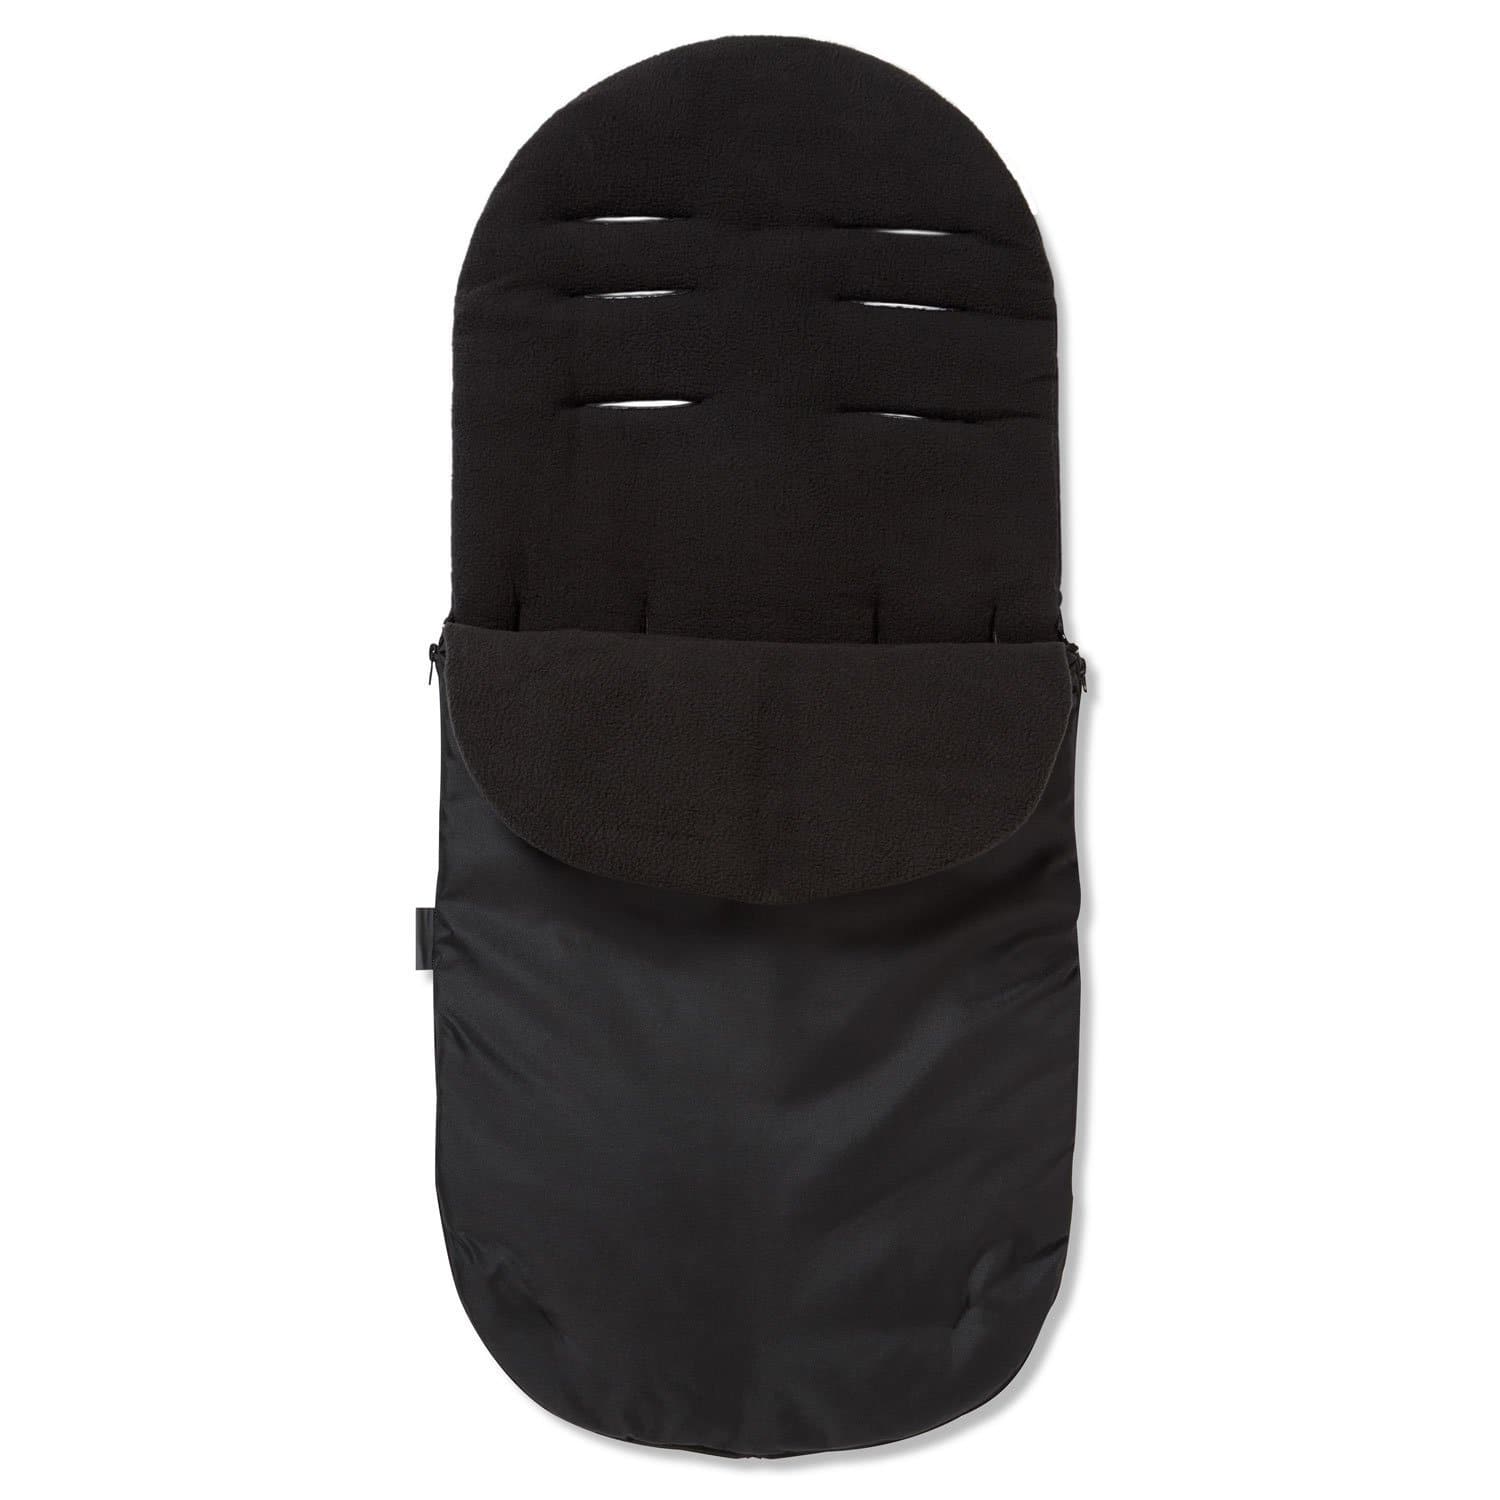 Footmuff / Cosy Toes Compatible with Urban Detour - Black / Fits All Models | For Your Little One